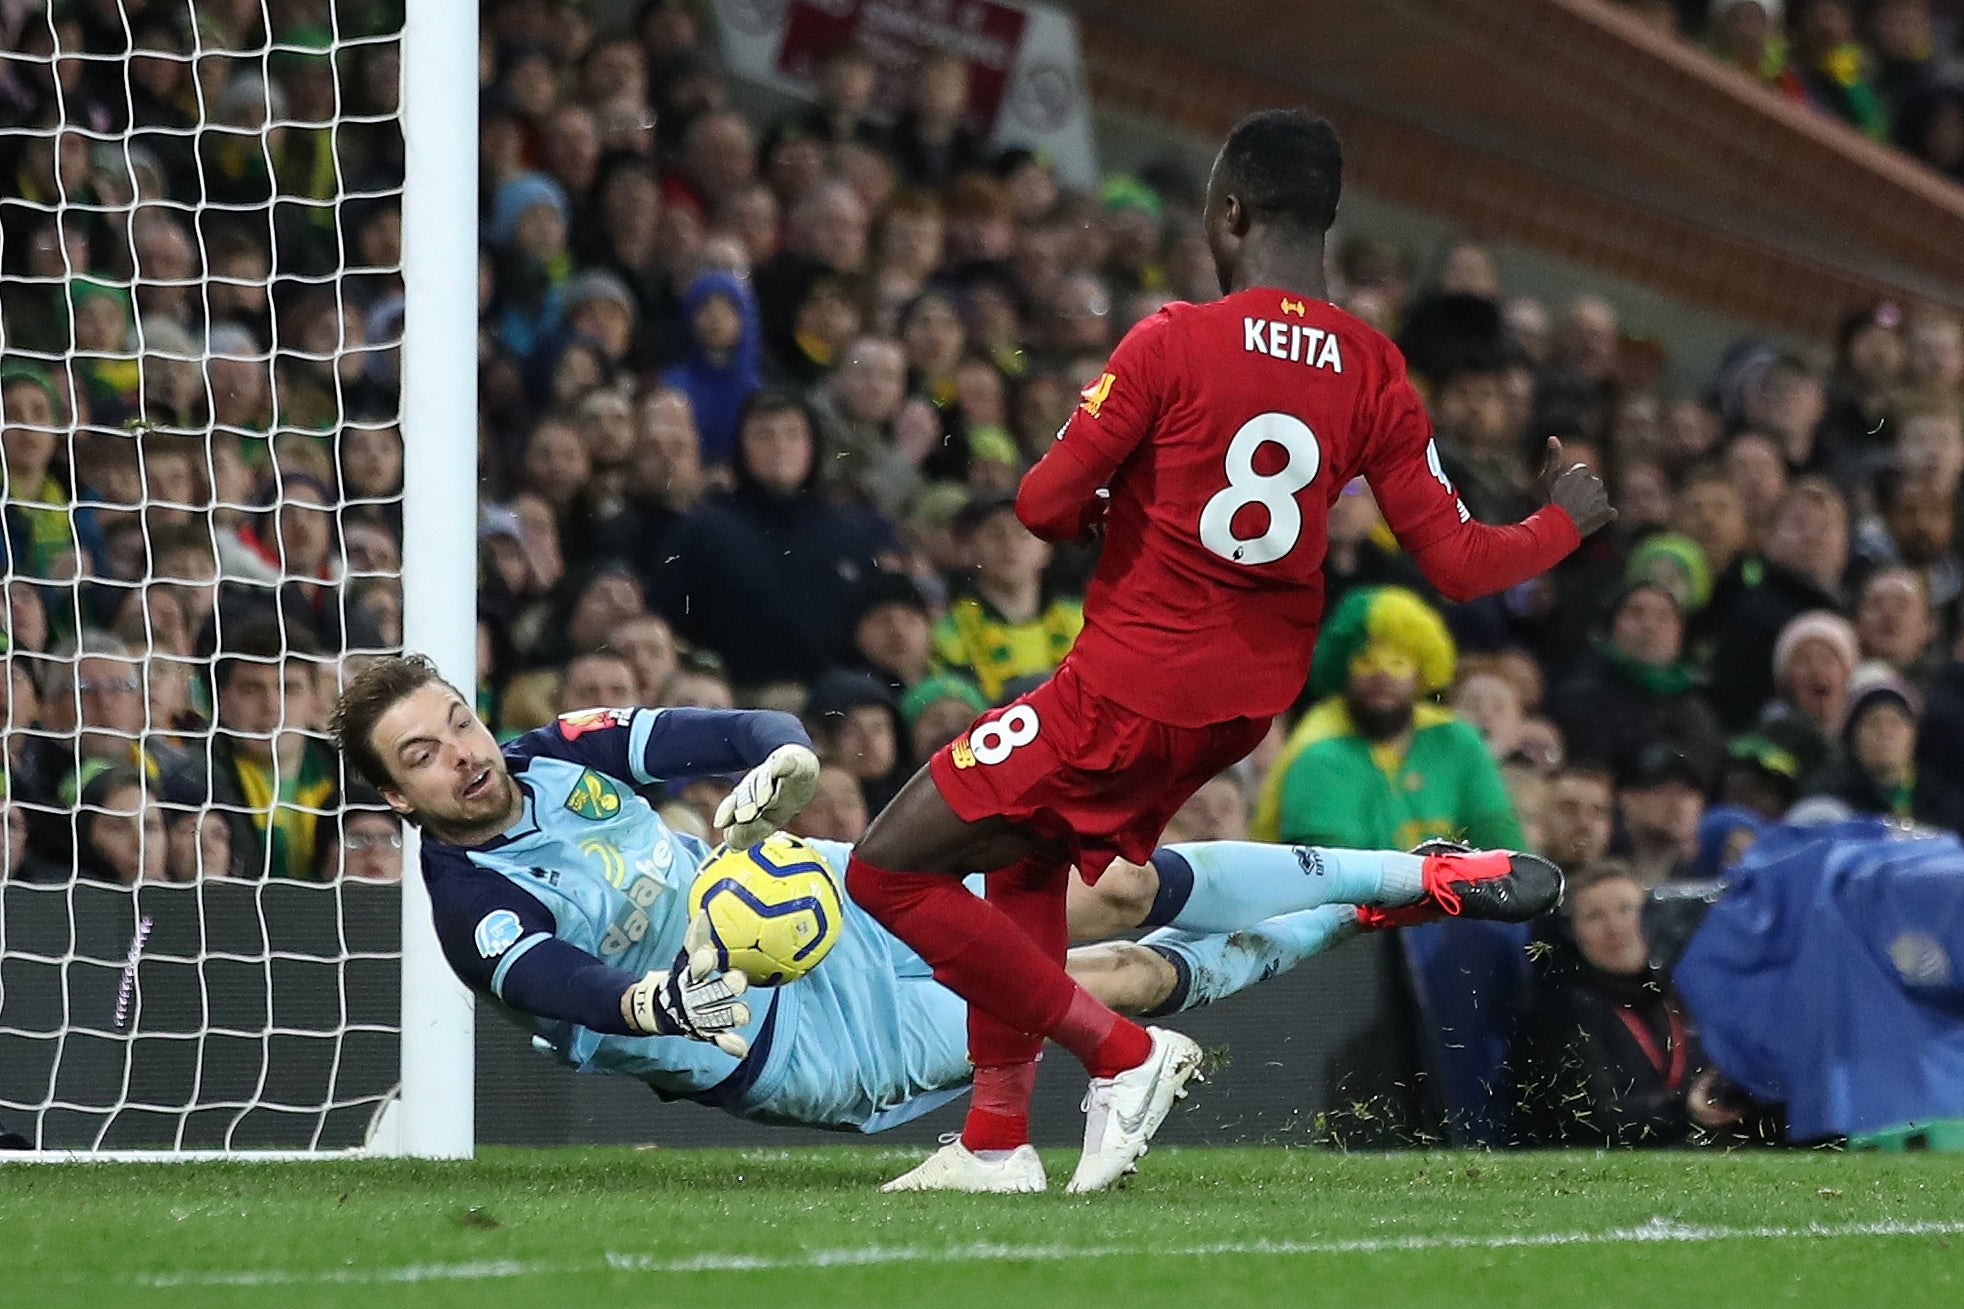 Keita should have scored with one close-range chance on goal